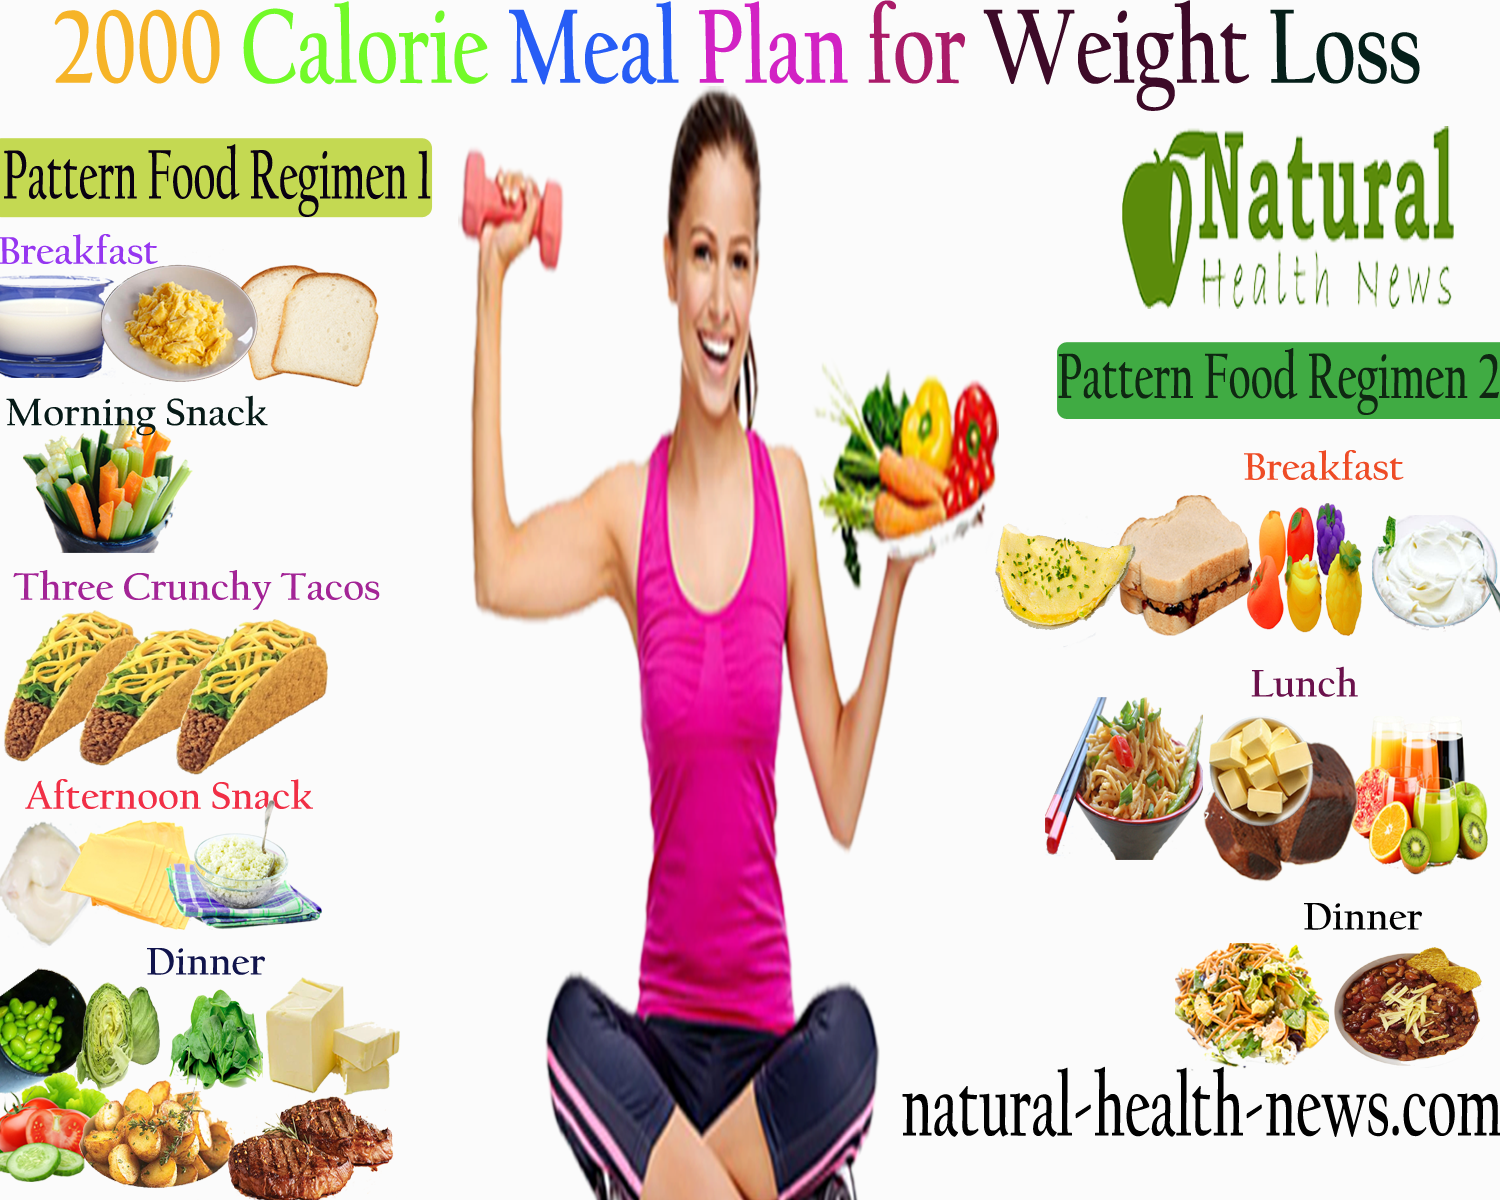 2000 Calorie Meal Plan for Weight Loss